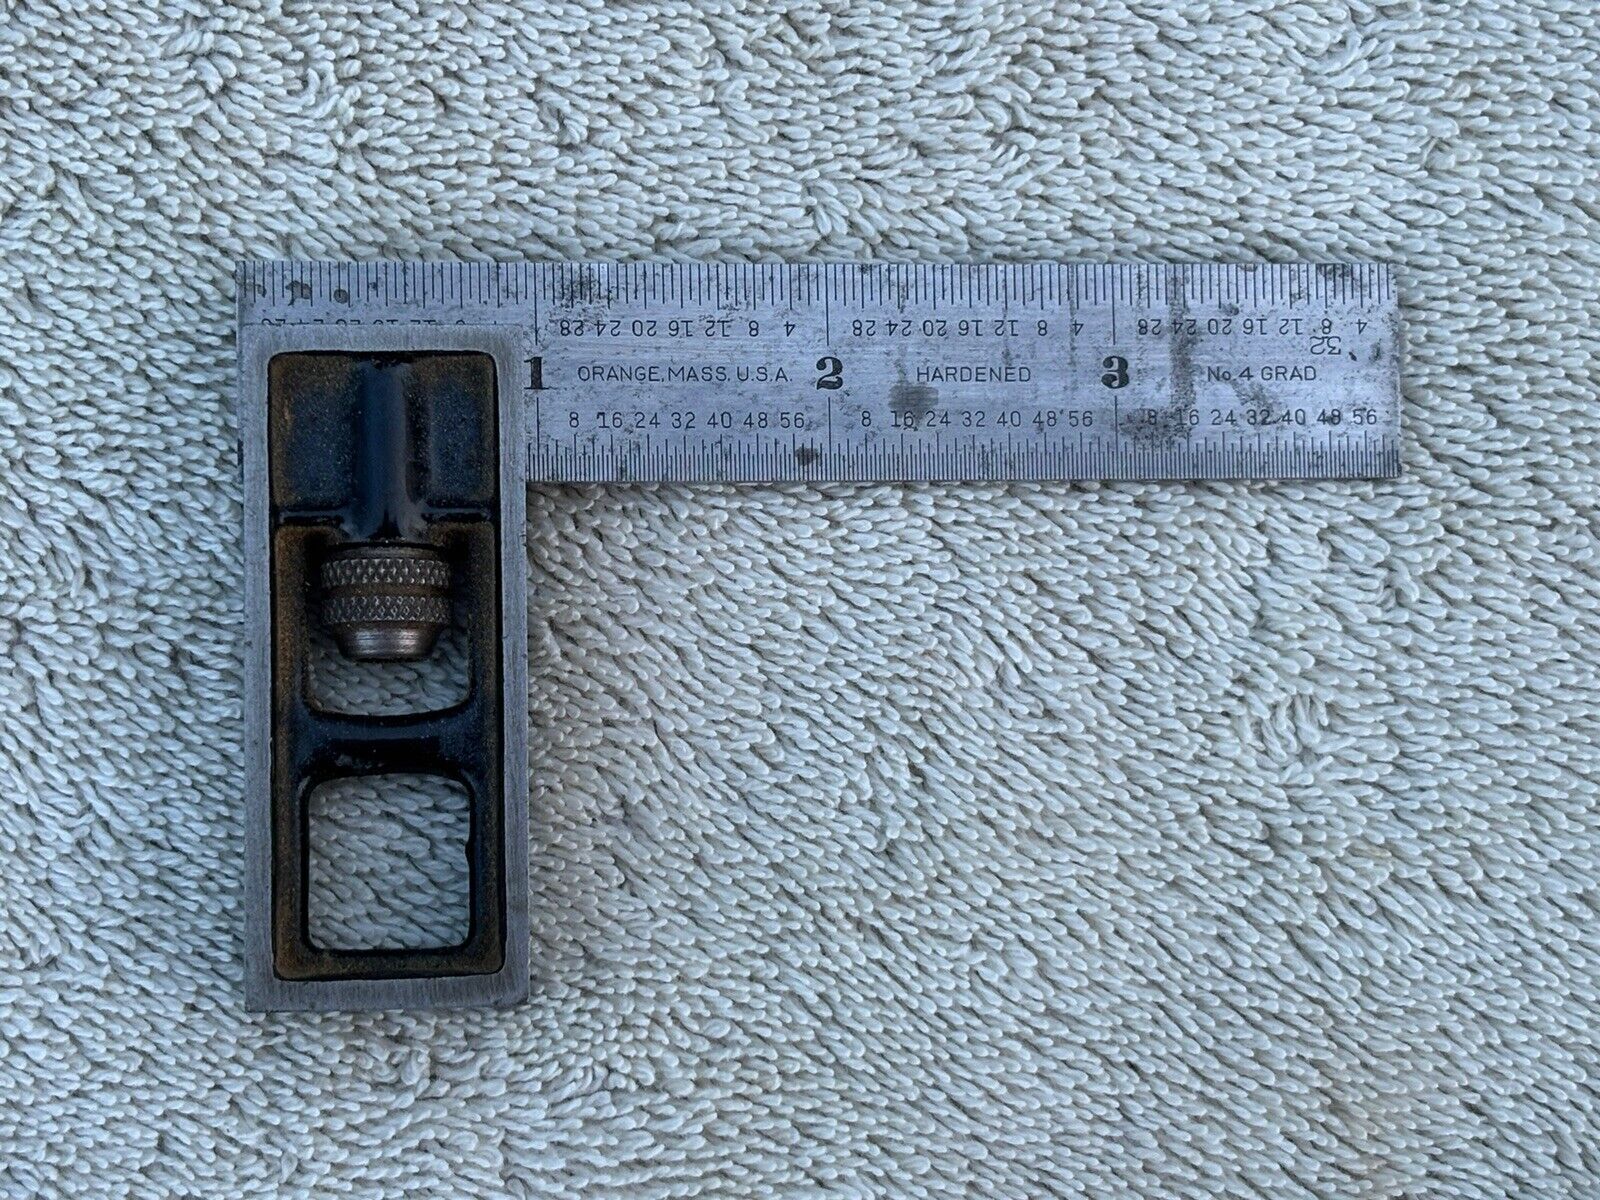 Union Tool Double Square No. 4 Grad Ruler 4” Machinist Tool No Owners Engravings